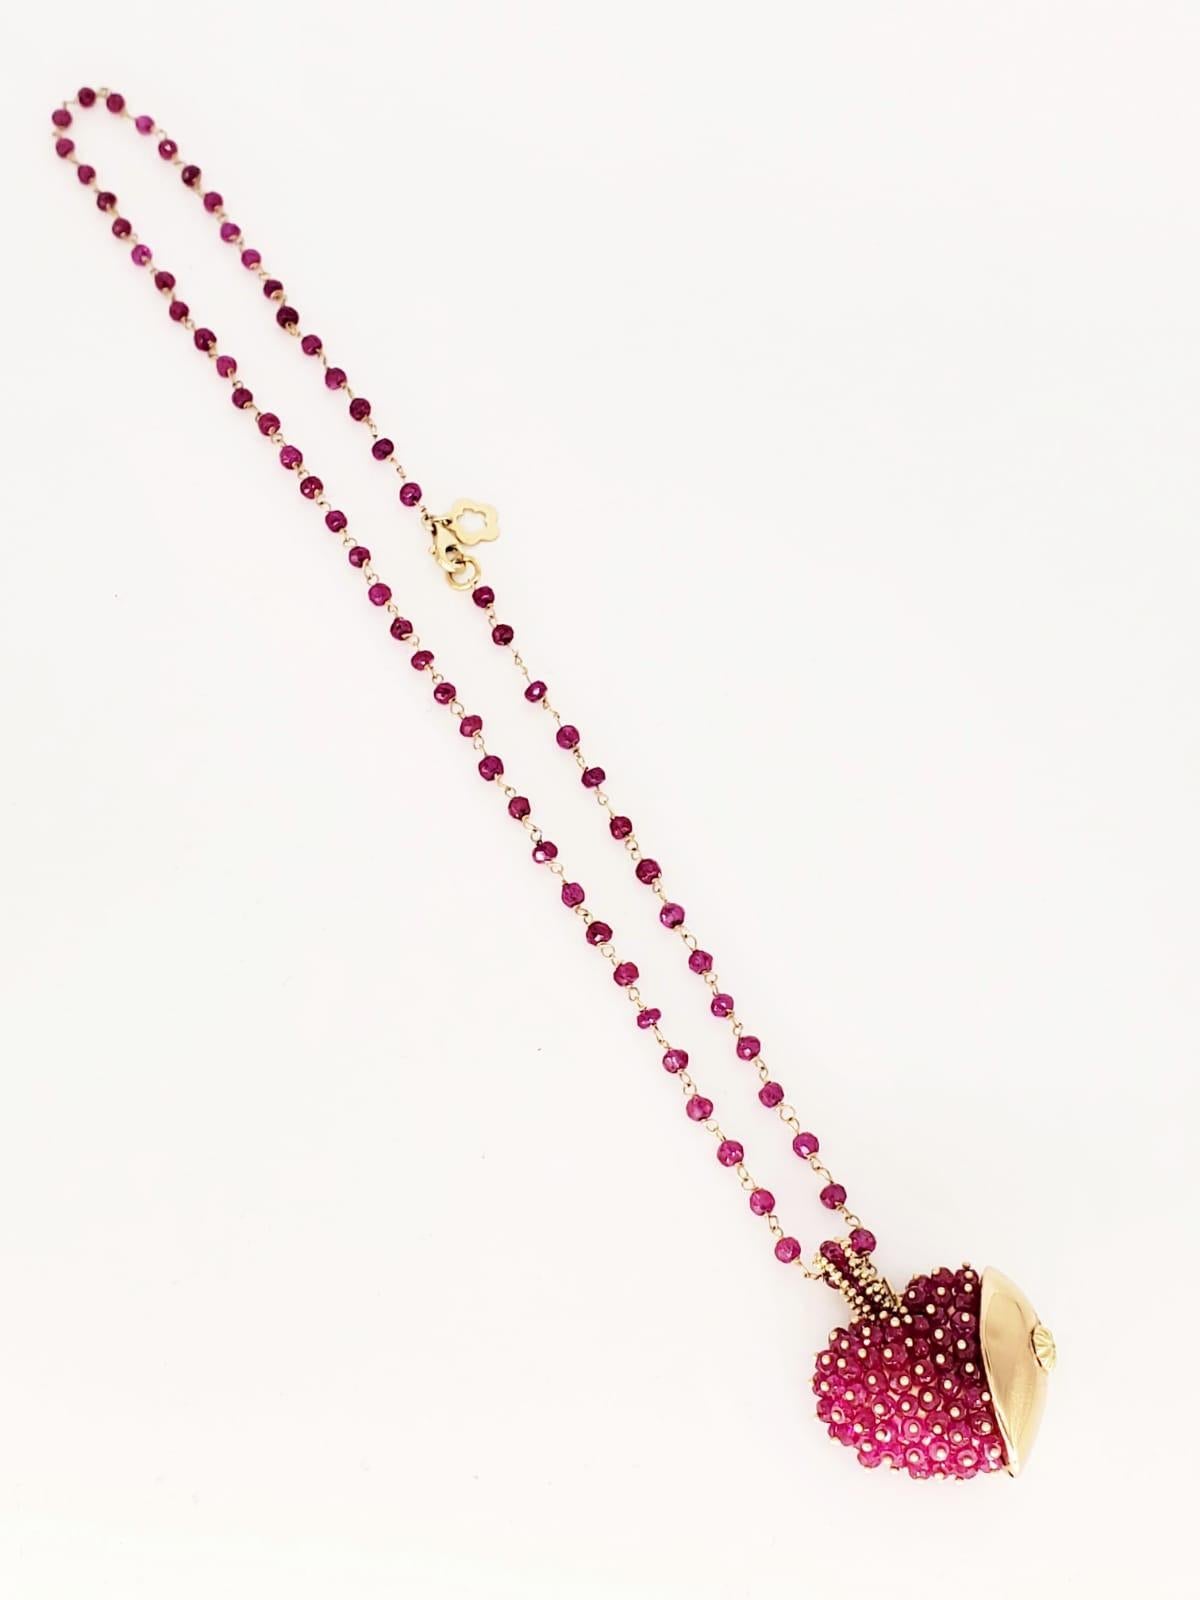 Vintage Strawberry Heart 50 Carat Faceted Ruby Beads Necklace 14k Gold. Each Ruby bead measures approx 3.6mm and is 18 inches long. The heart measures 30mm x 26mm without the bail. Very Stunning piece of art jewelry to wear.